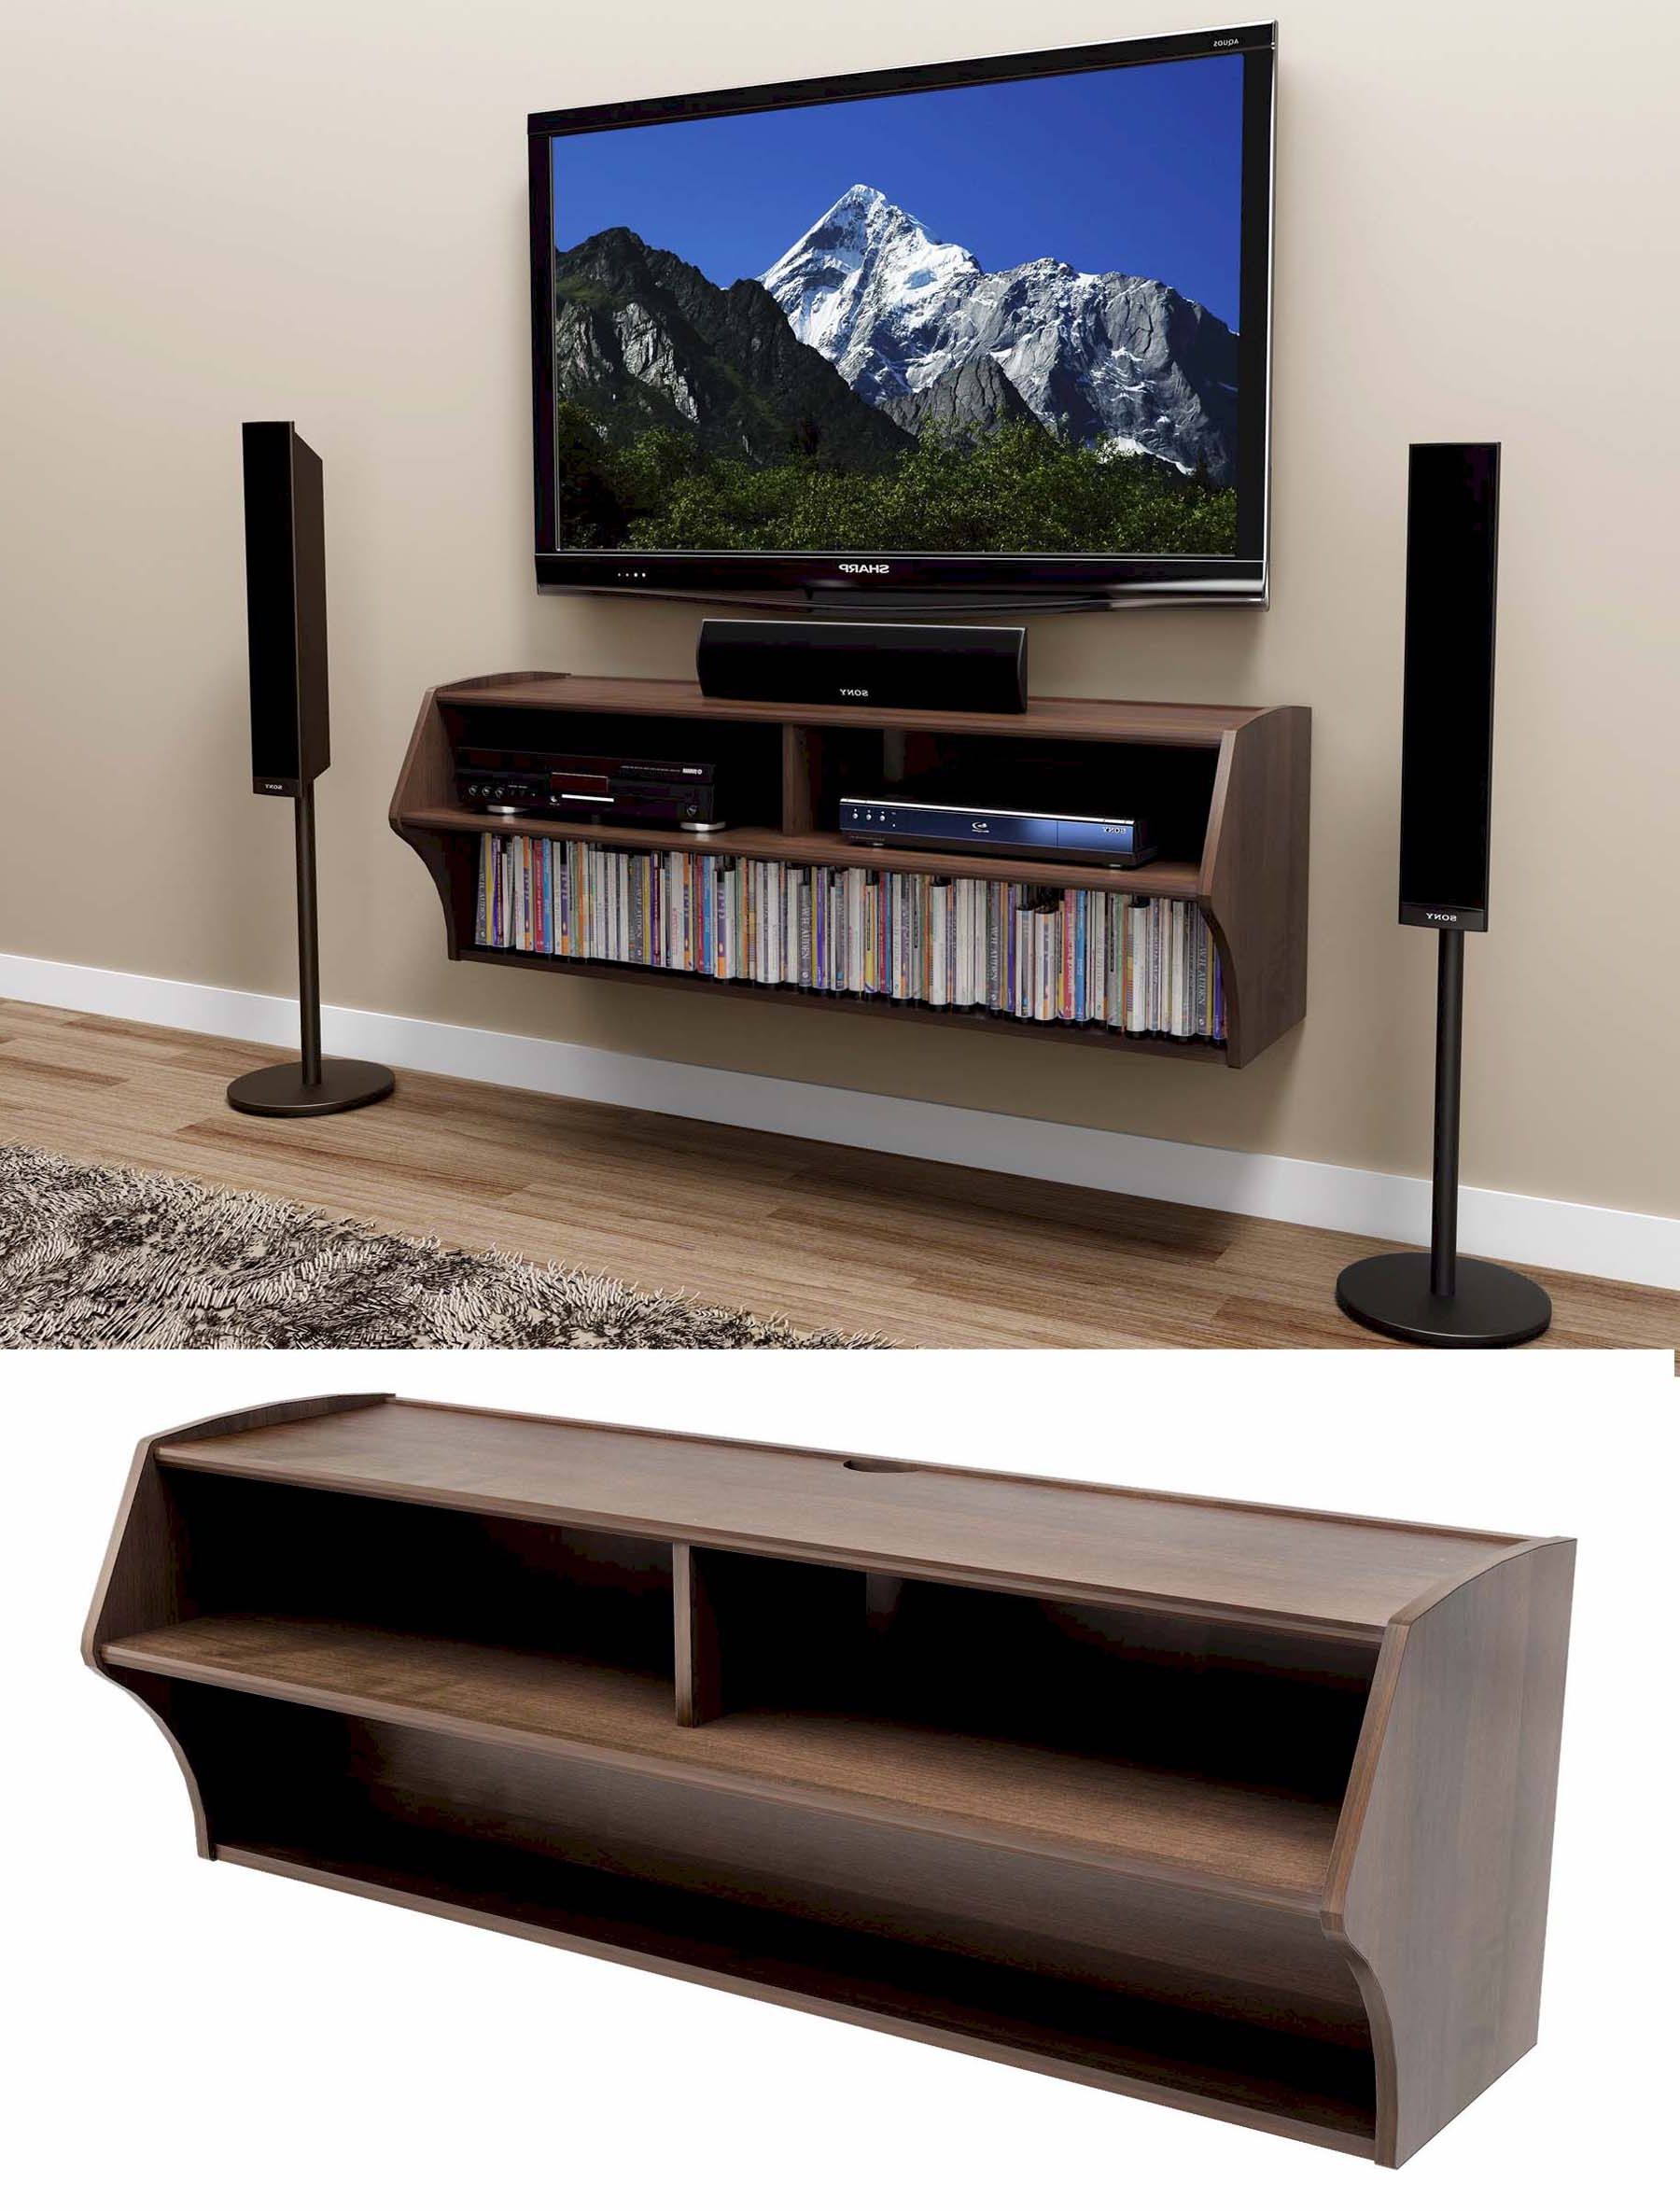 Corner Tv Shelf Component Stand Under For Cable Box Wall Mount With For Current Tv Stands Over Cable Box (View 8 of 20)